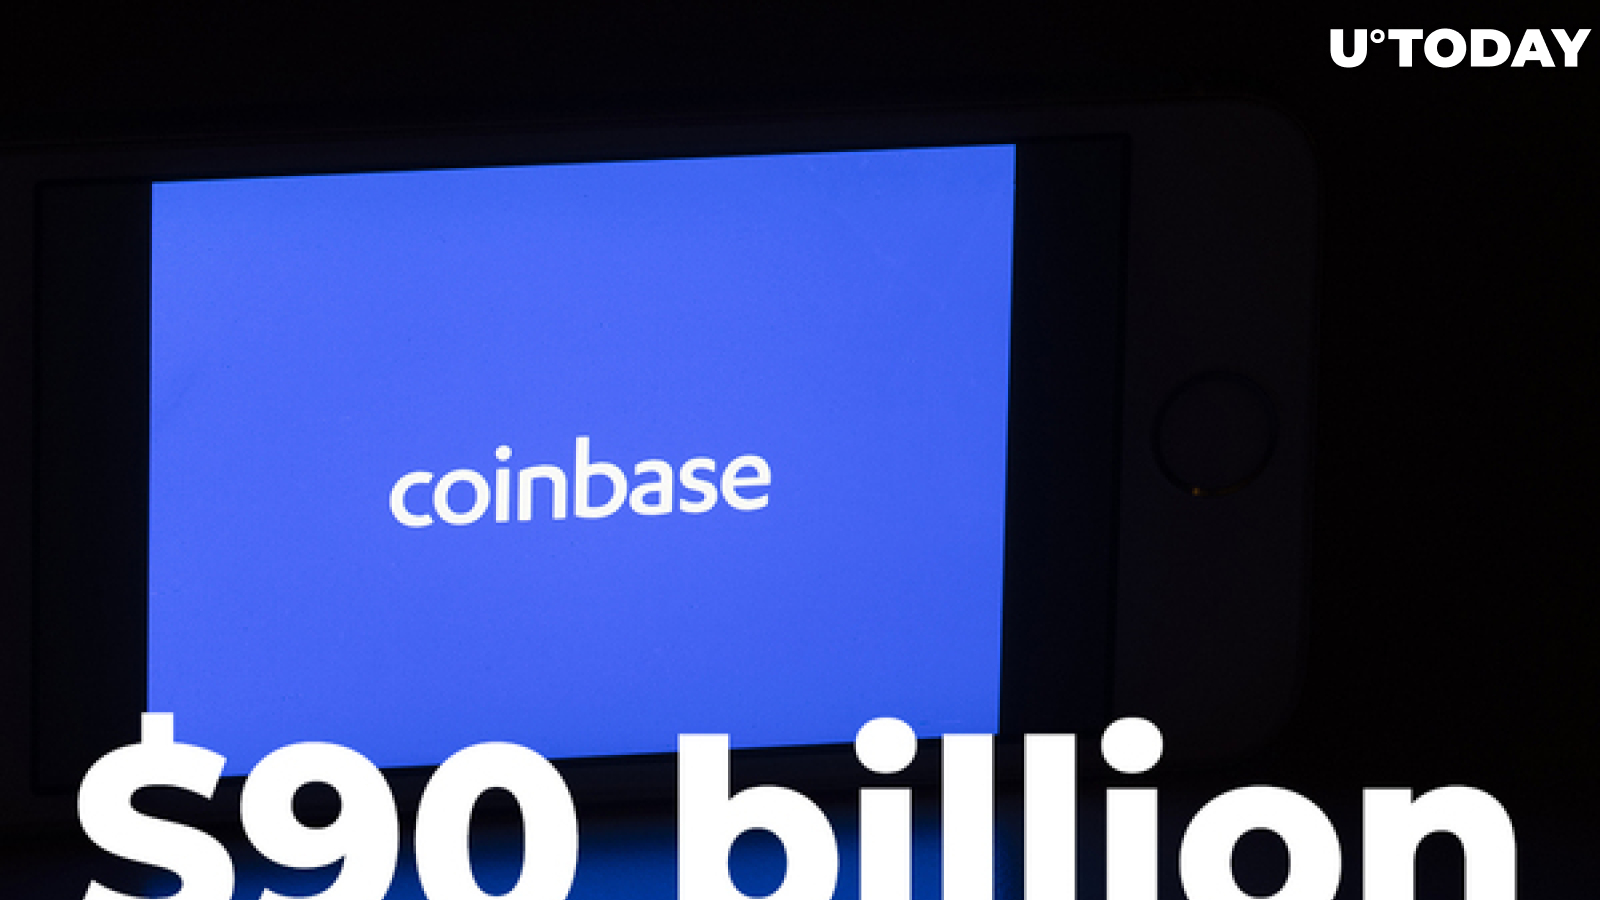 Coinbase Stocks Trade at $90 Billion Evaluation During Private Sale on Nasdaq